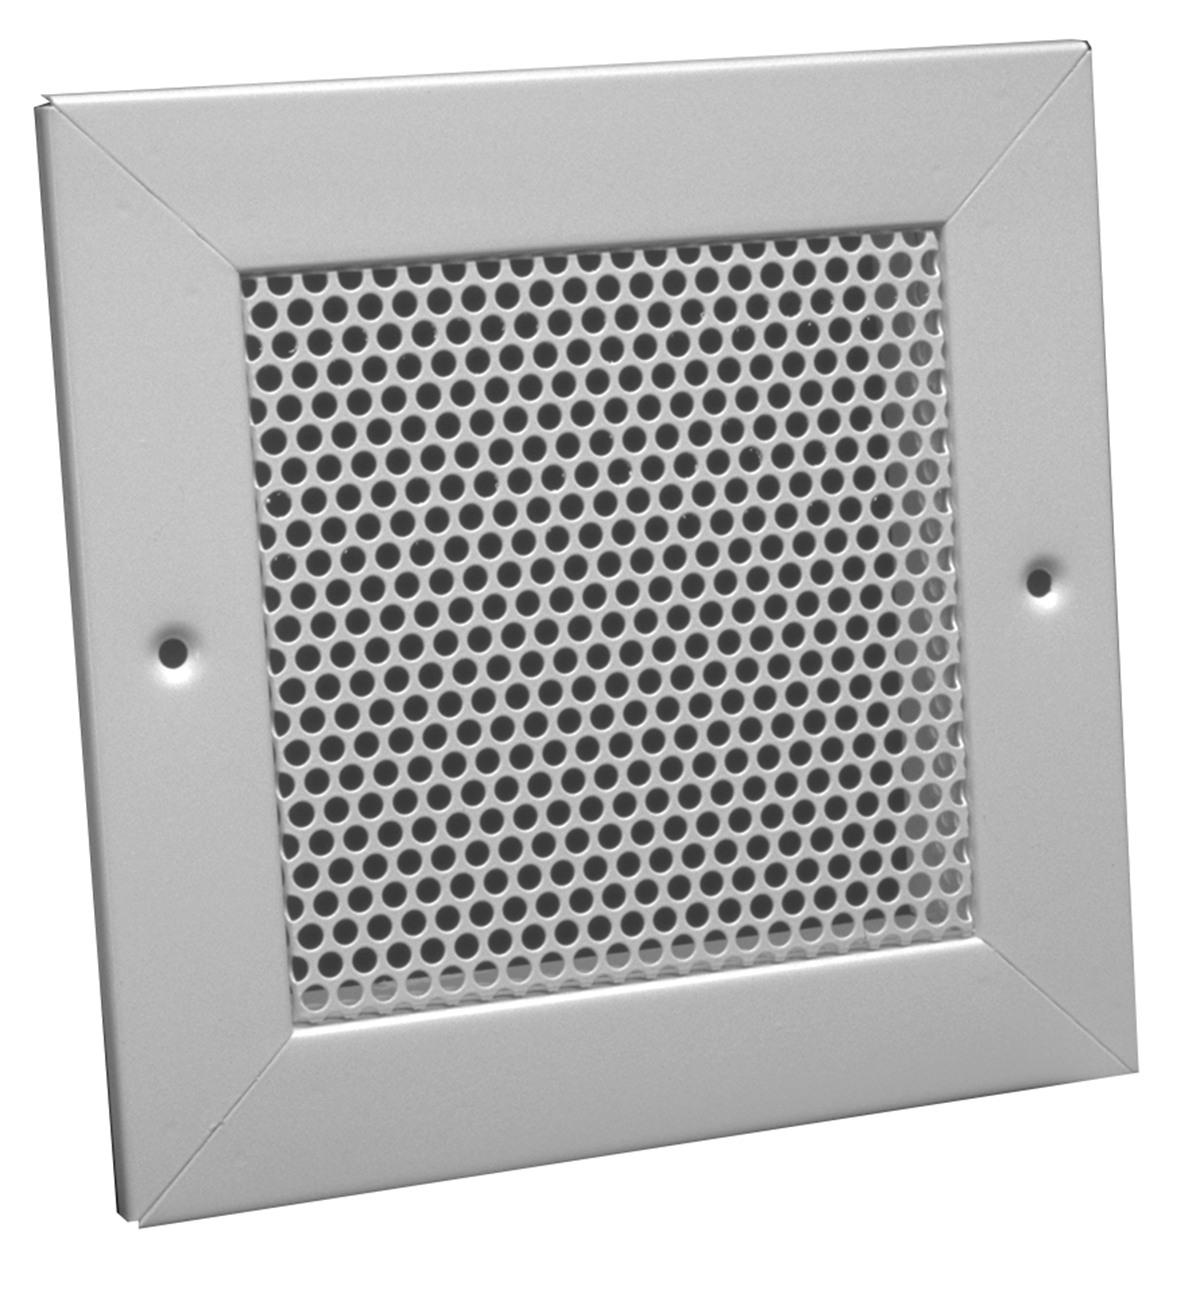 PFG - PERFORATED FACE RETURN AIR GRILLE